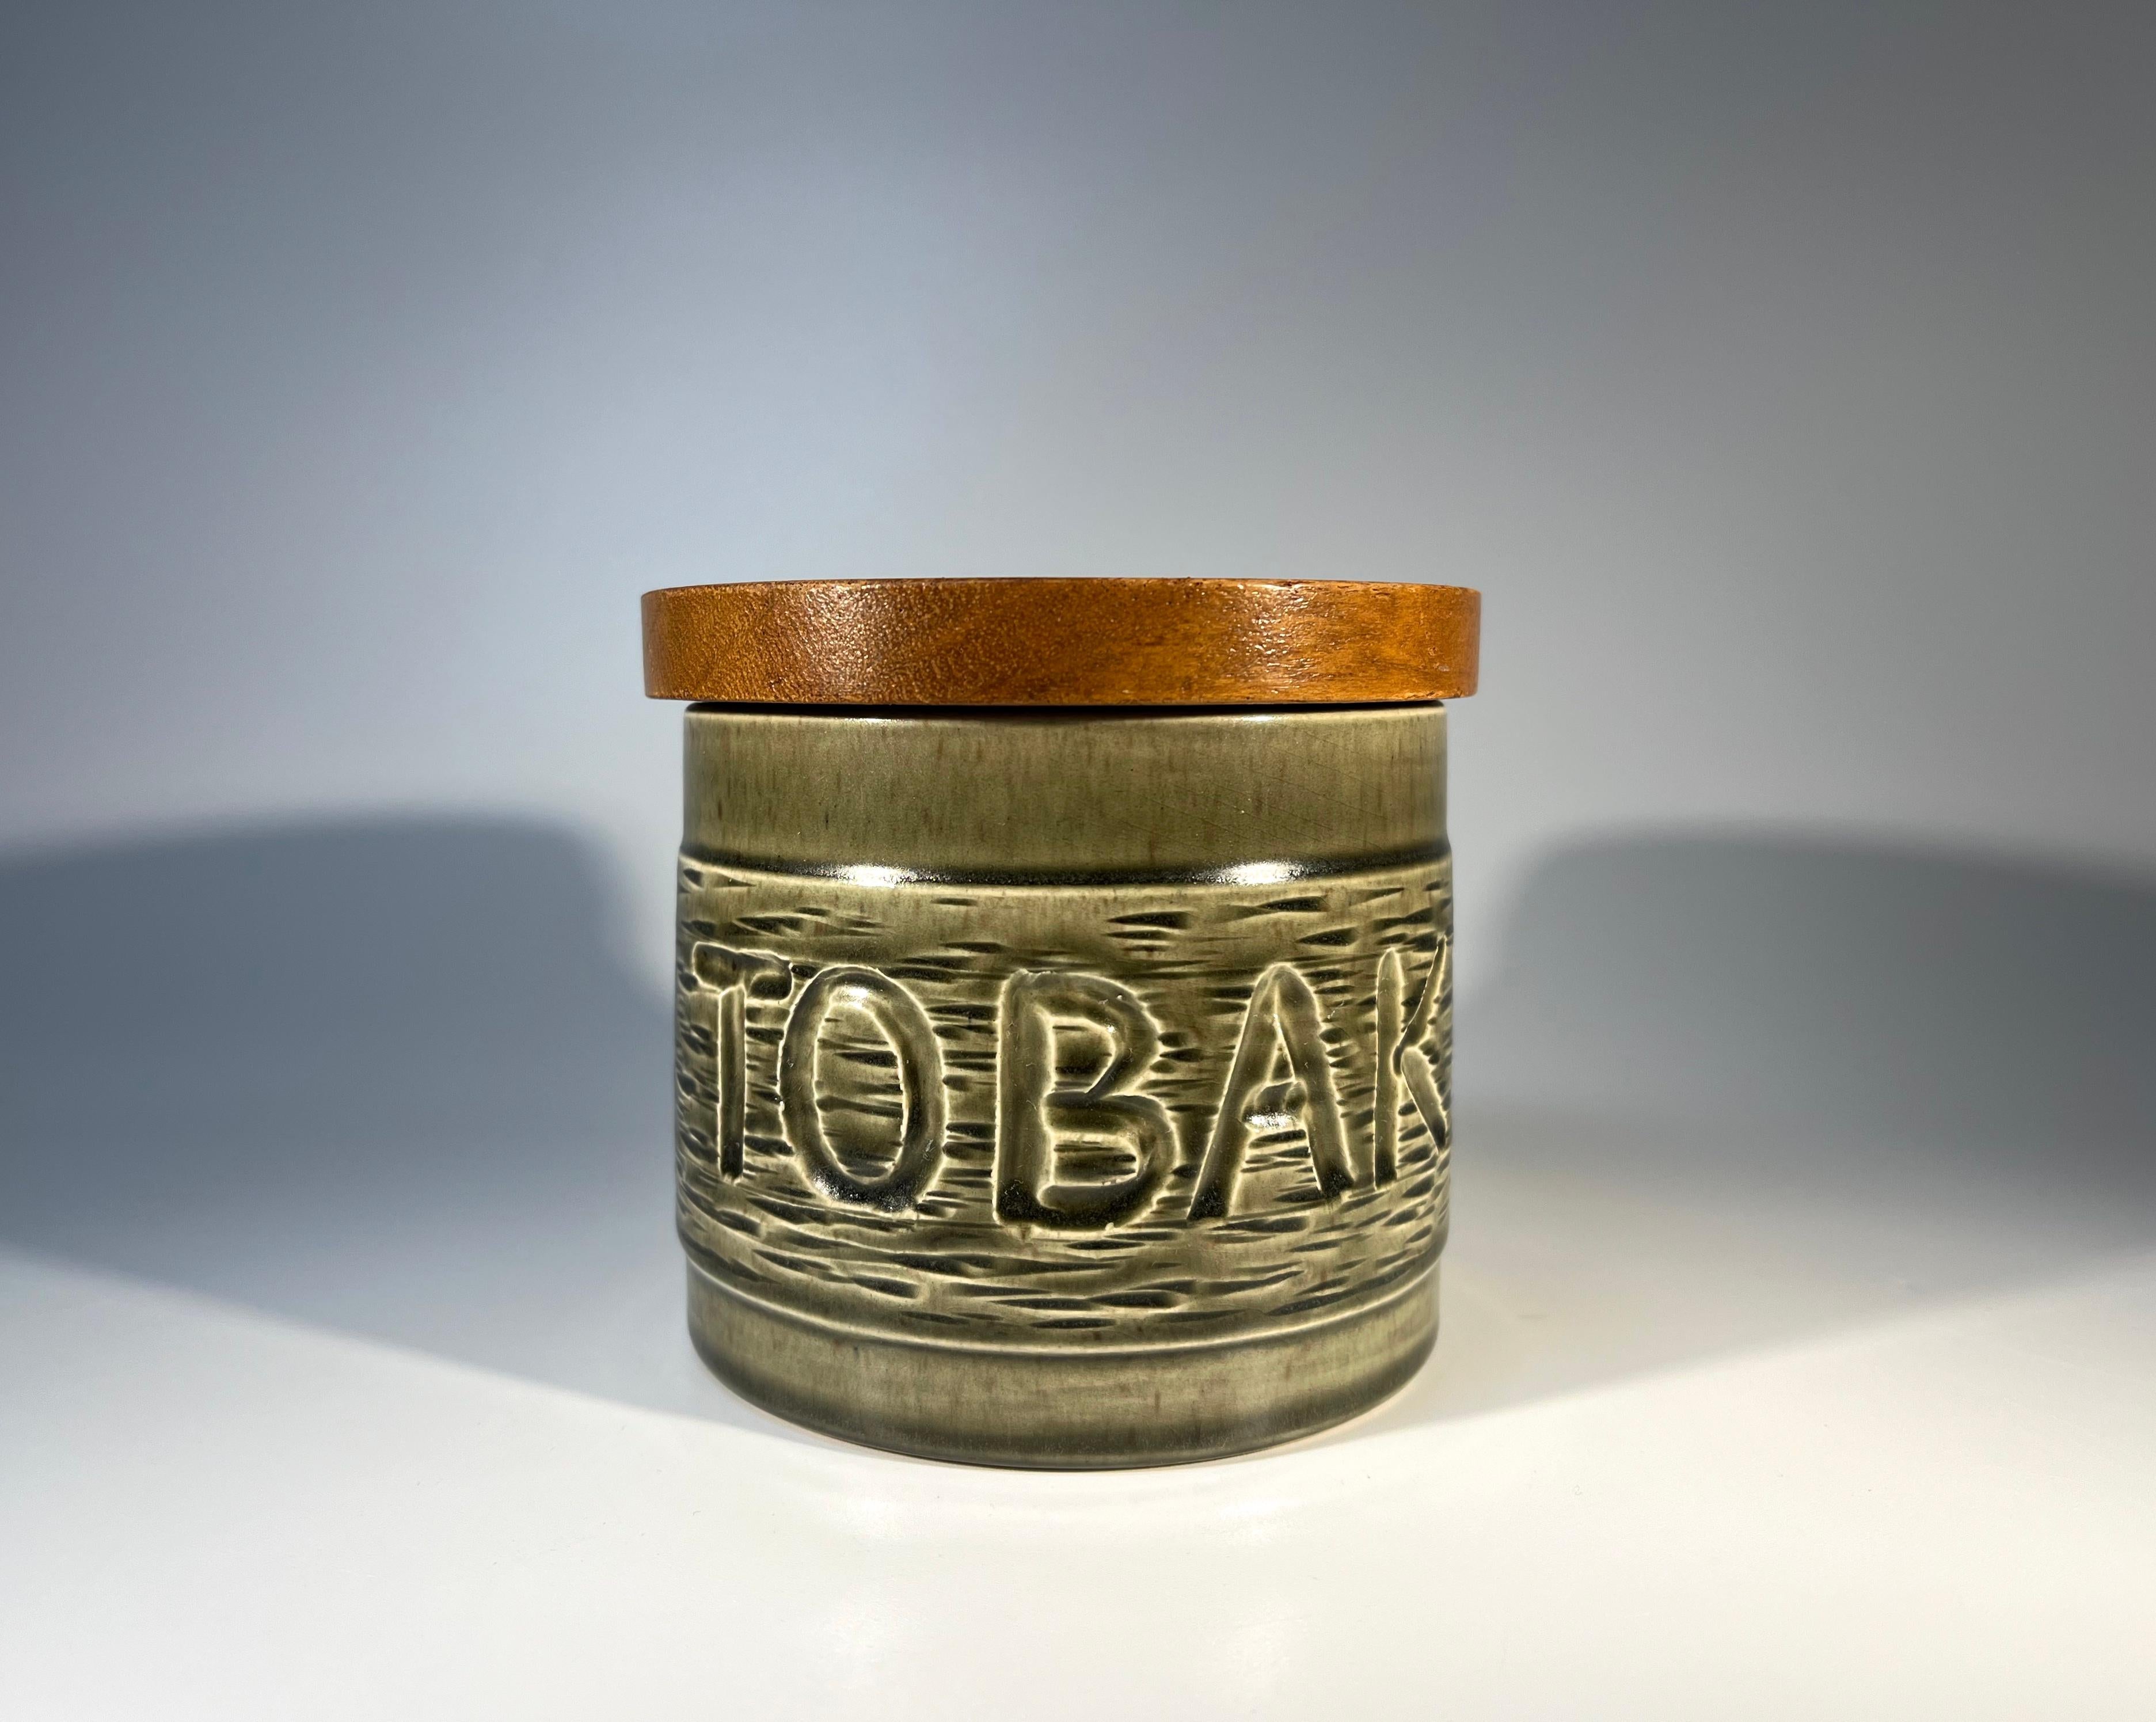 Typically Scandinavian understated and functional, ceramic tobacco jar with teak wooden lid
Tobak boldly incised within a subtle dark muted green glaze
Stamped Made in Sweden #903 on base
The tight fitting lid is fitted with cork inner
Circa